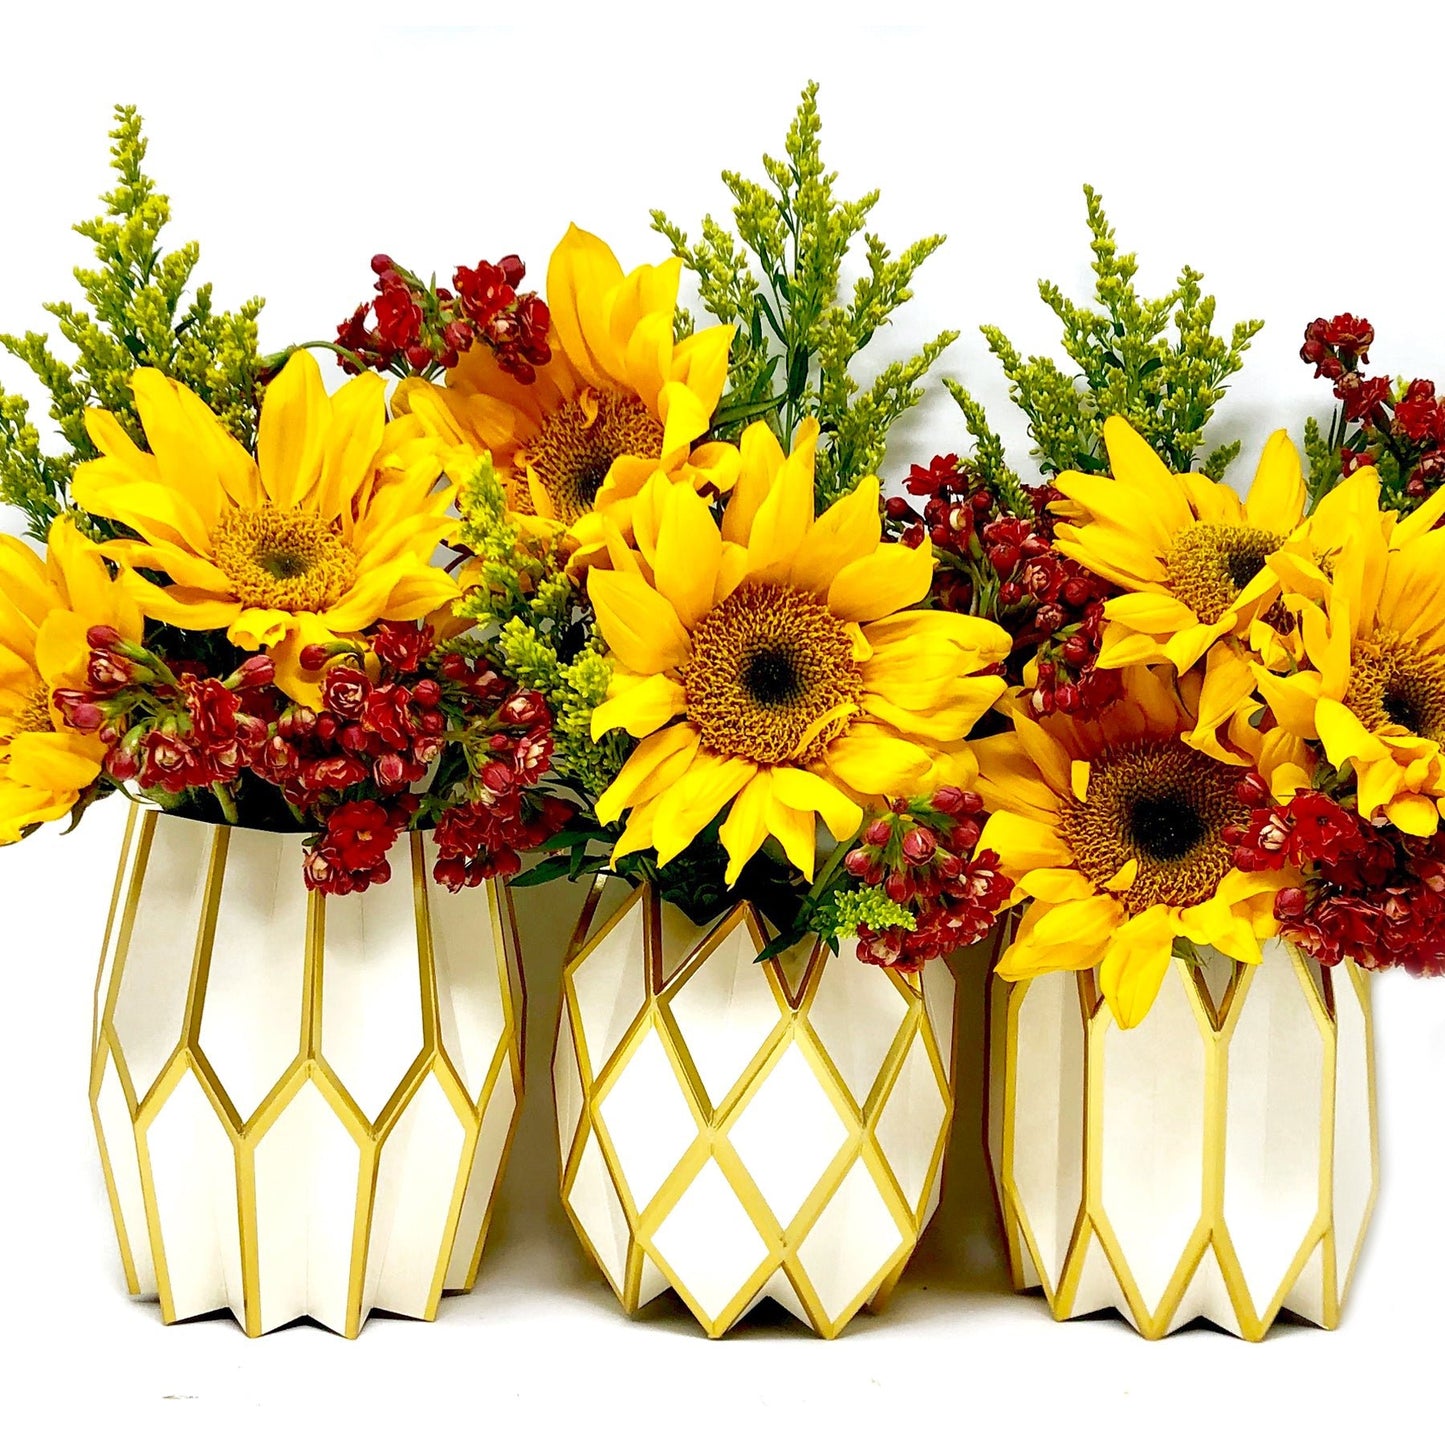 Gold and white paper vase sleeve centerpieces with fall flowers